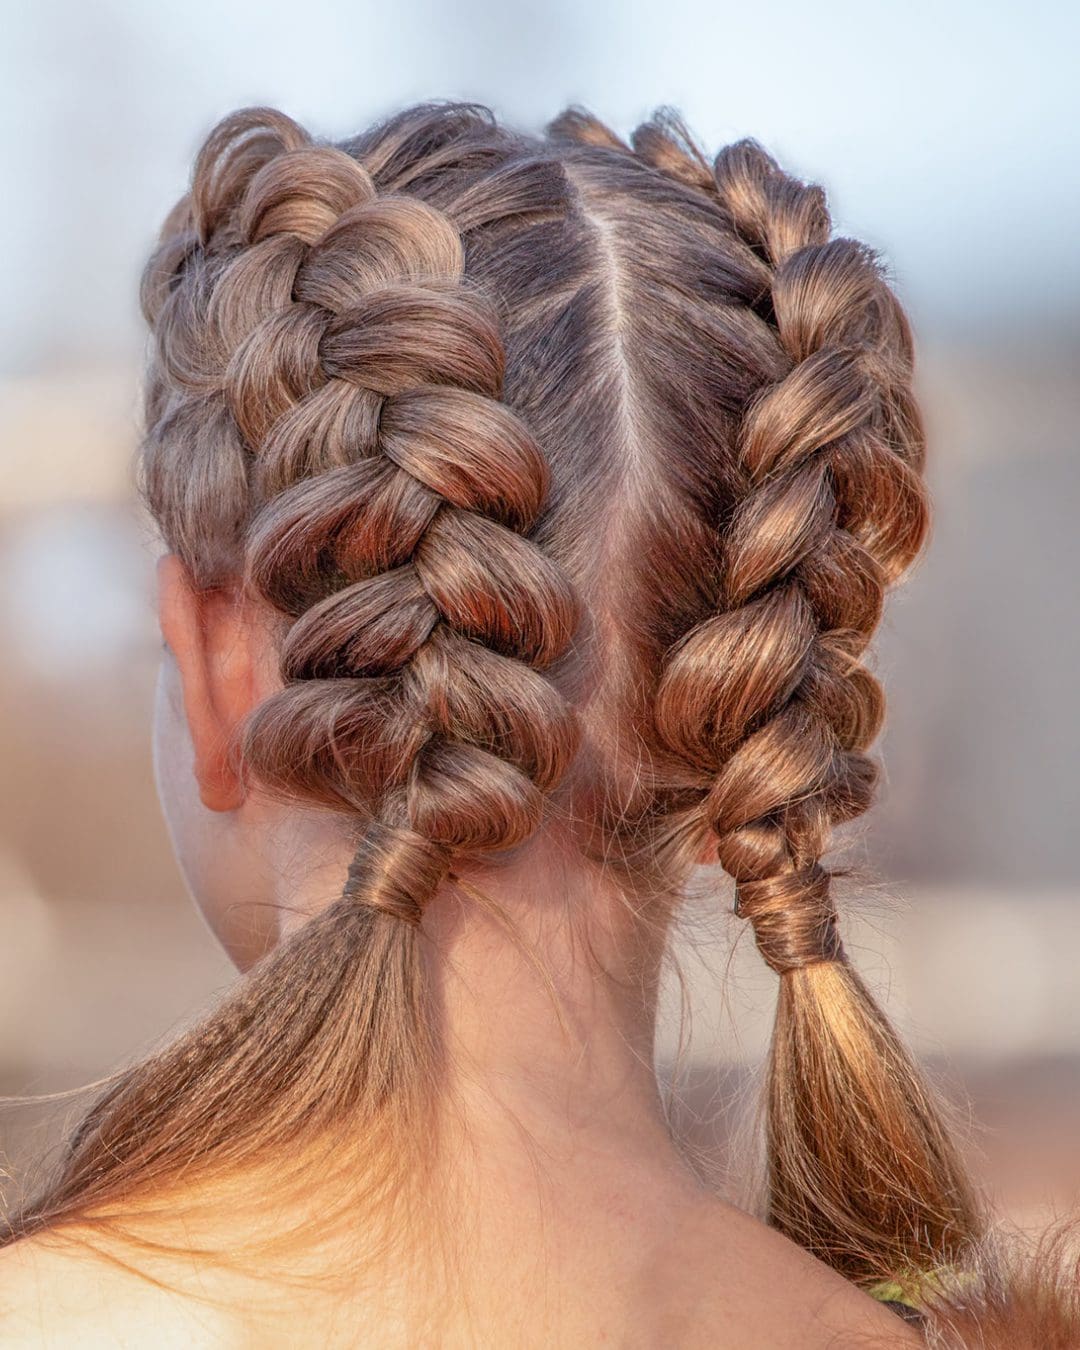 Fun Braid Hairstyle for the Summer - Stylish Life for Moms